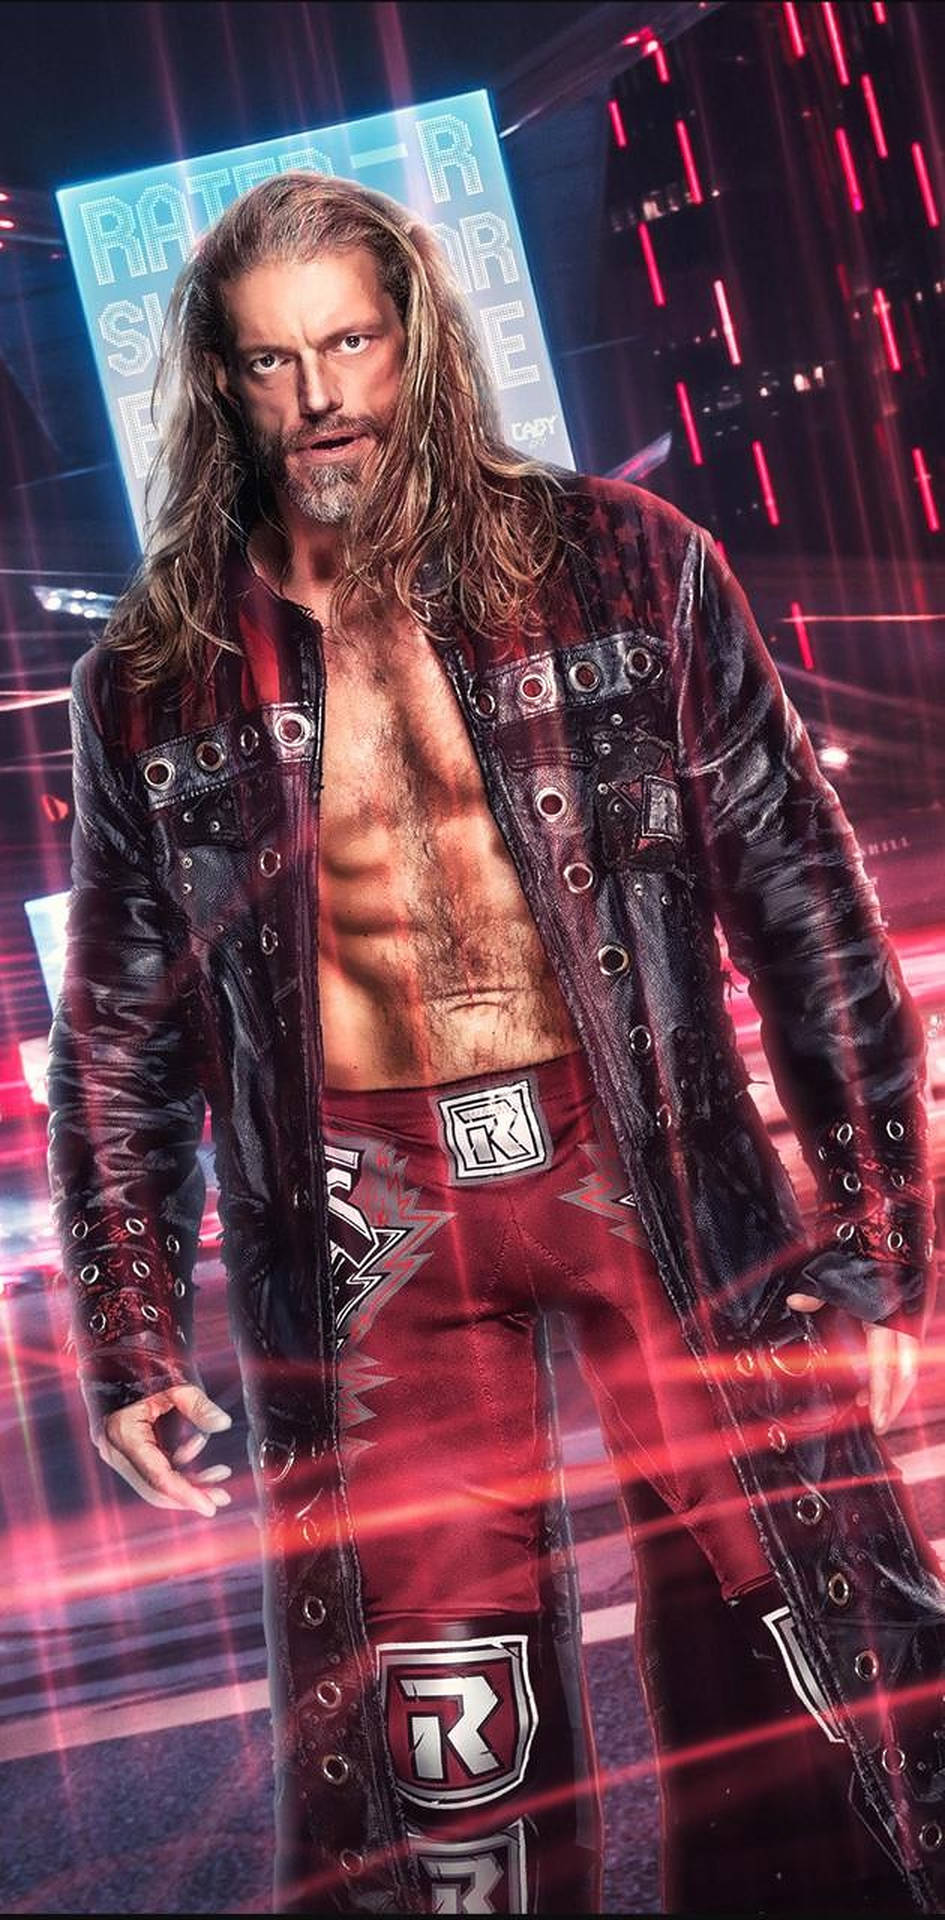 Wwe Edge Poster Background